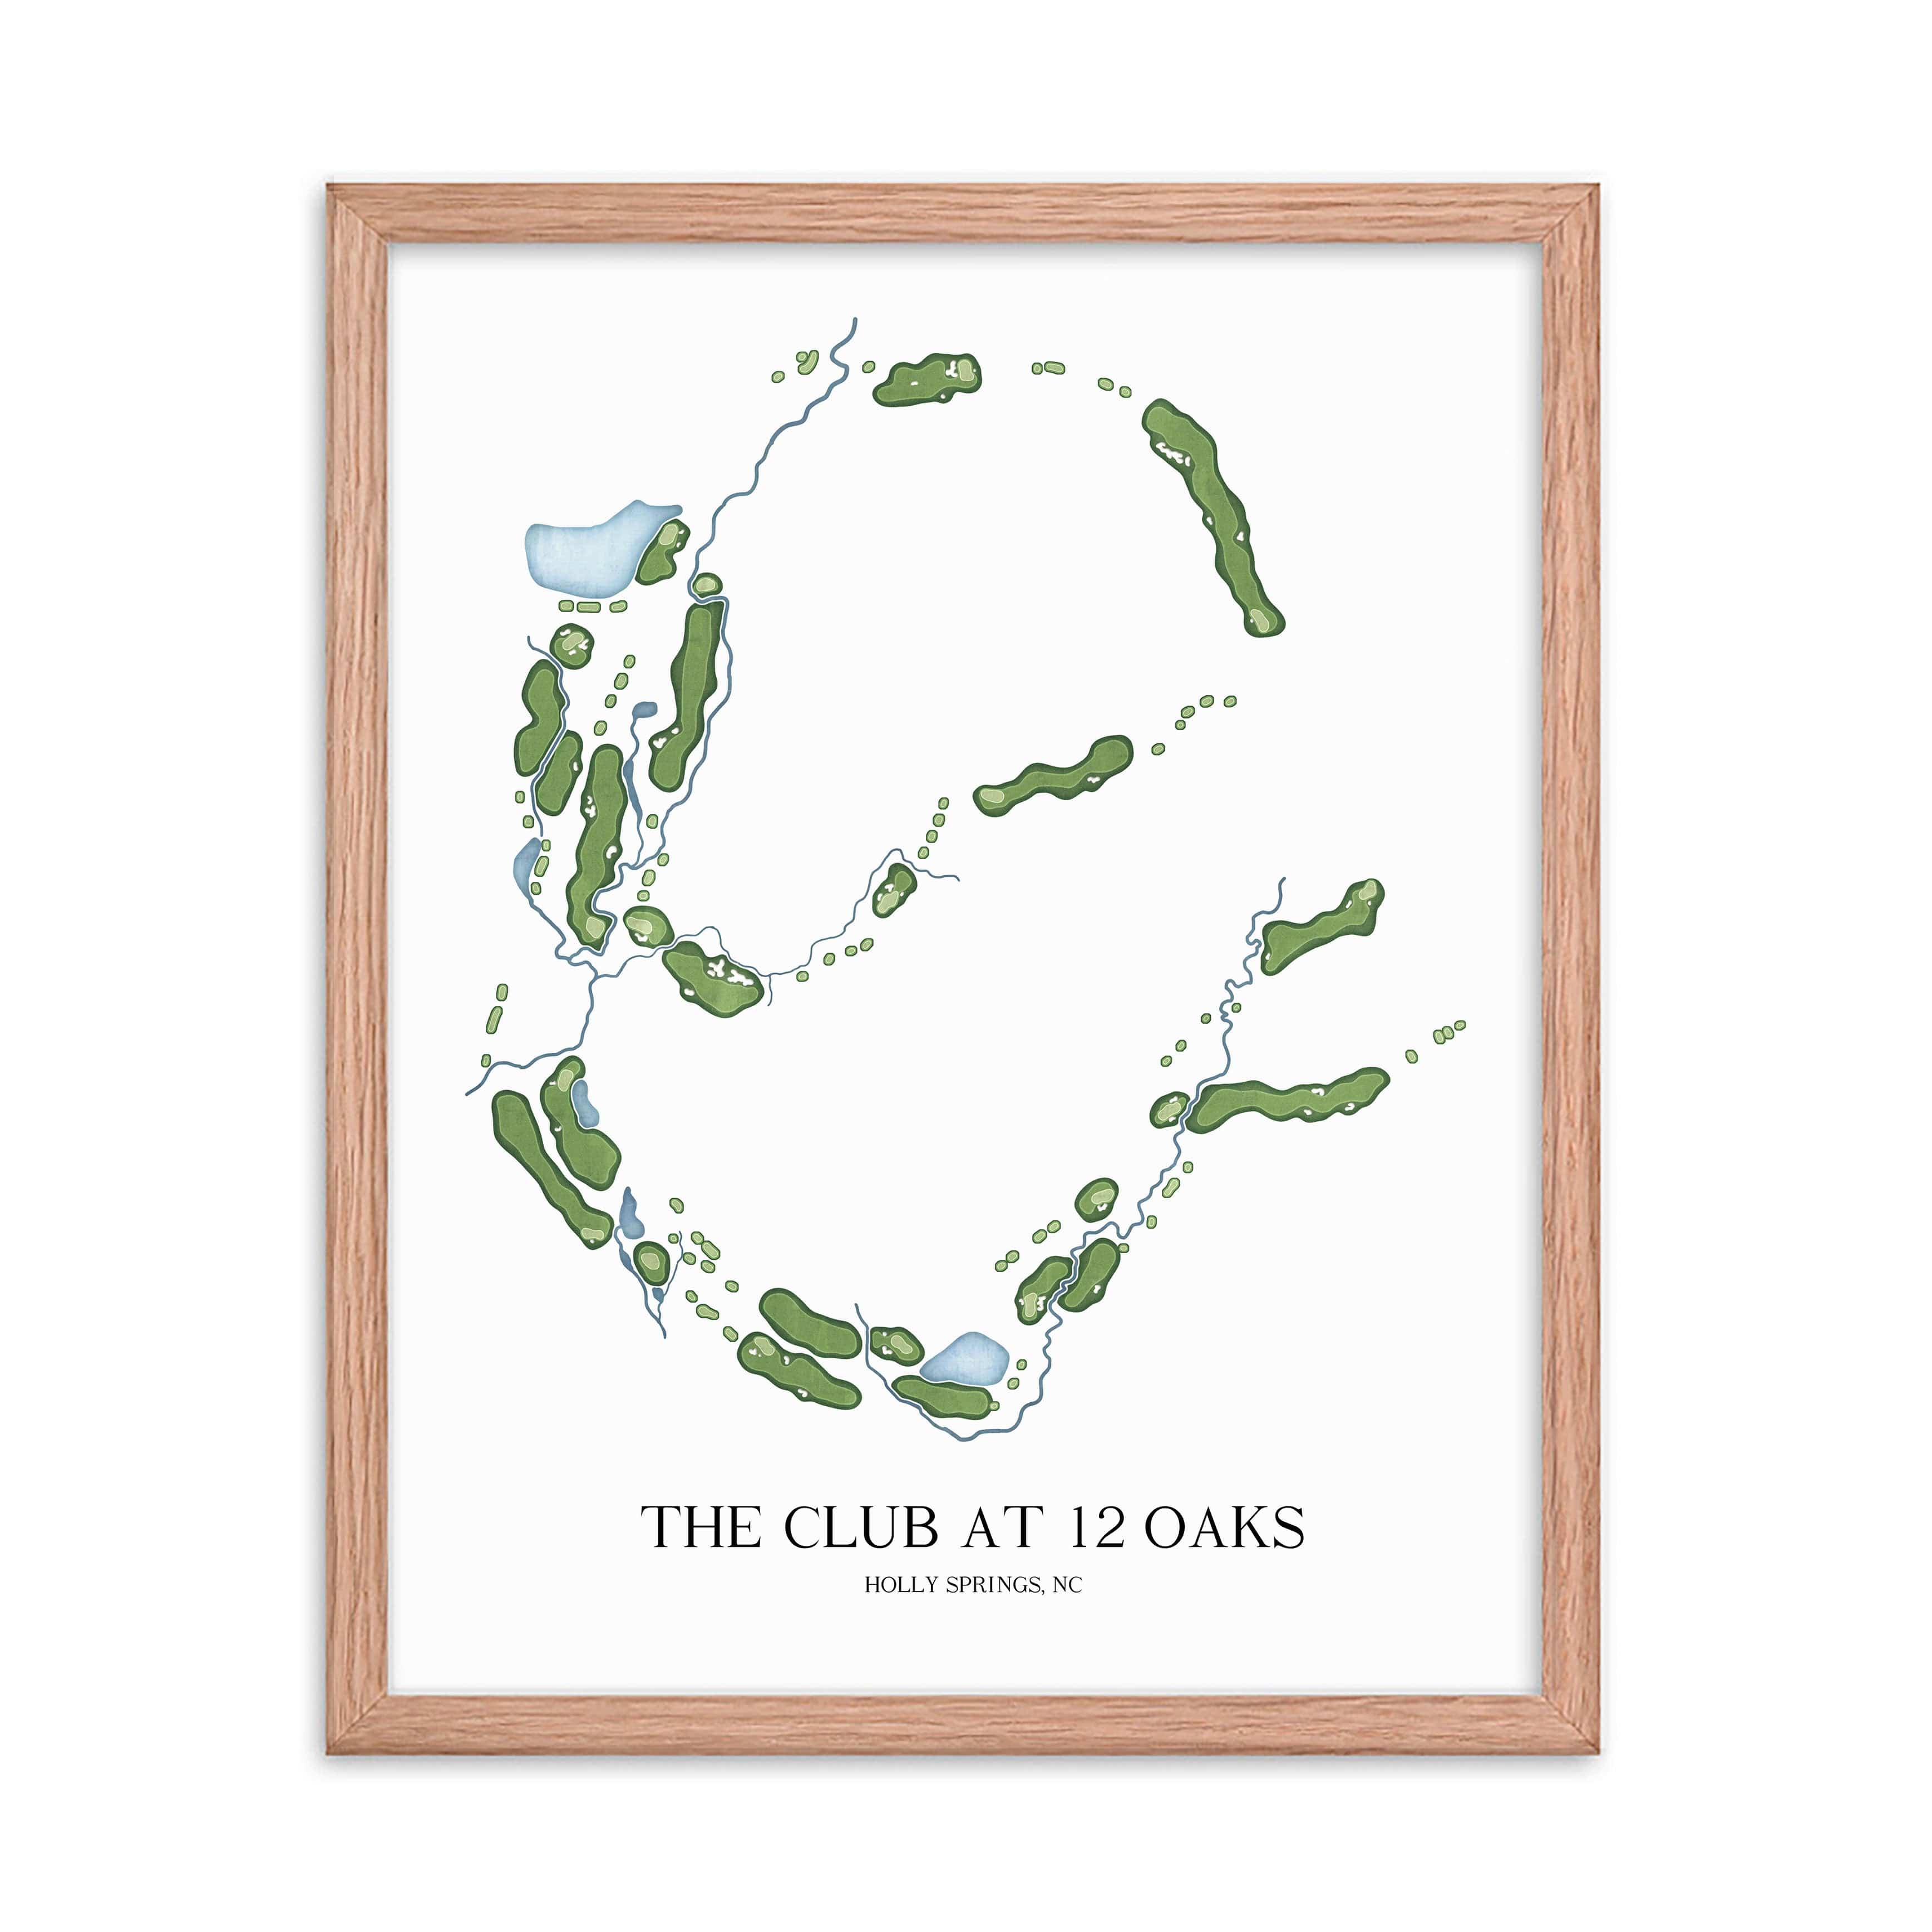 The 19th Hole Golf Shop - Golf Course Prints -  The Club at 12 Oaks Golf Course Map